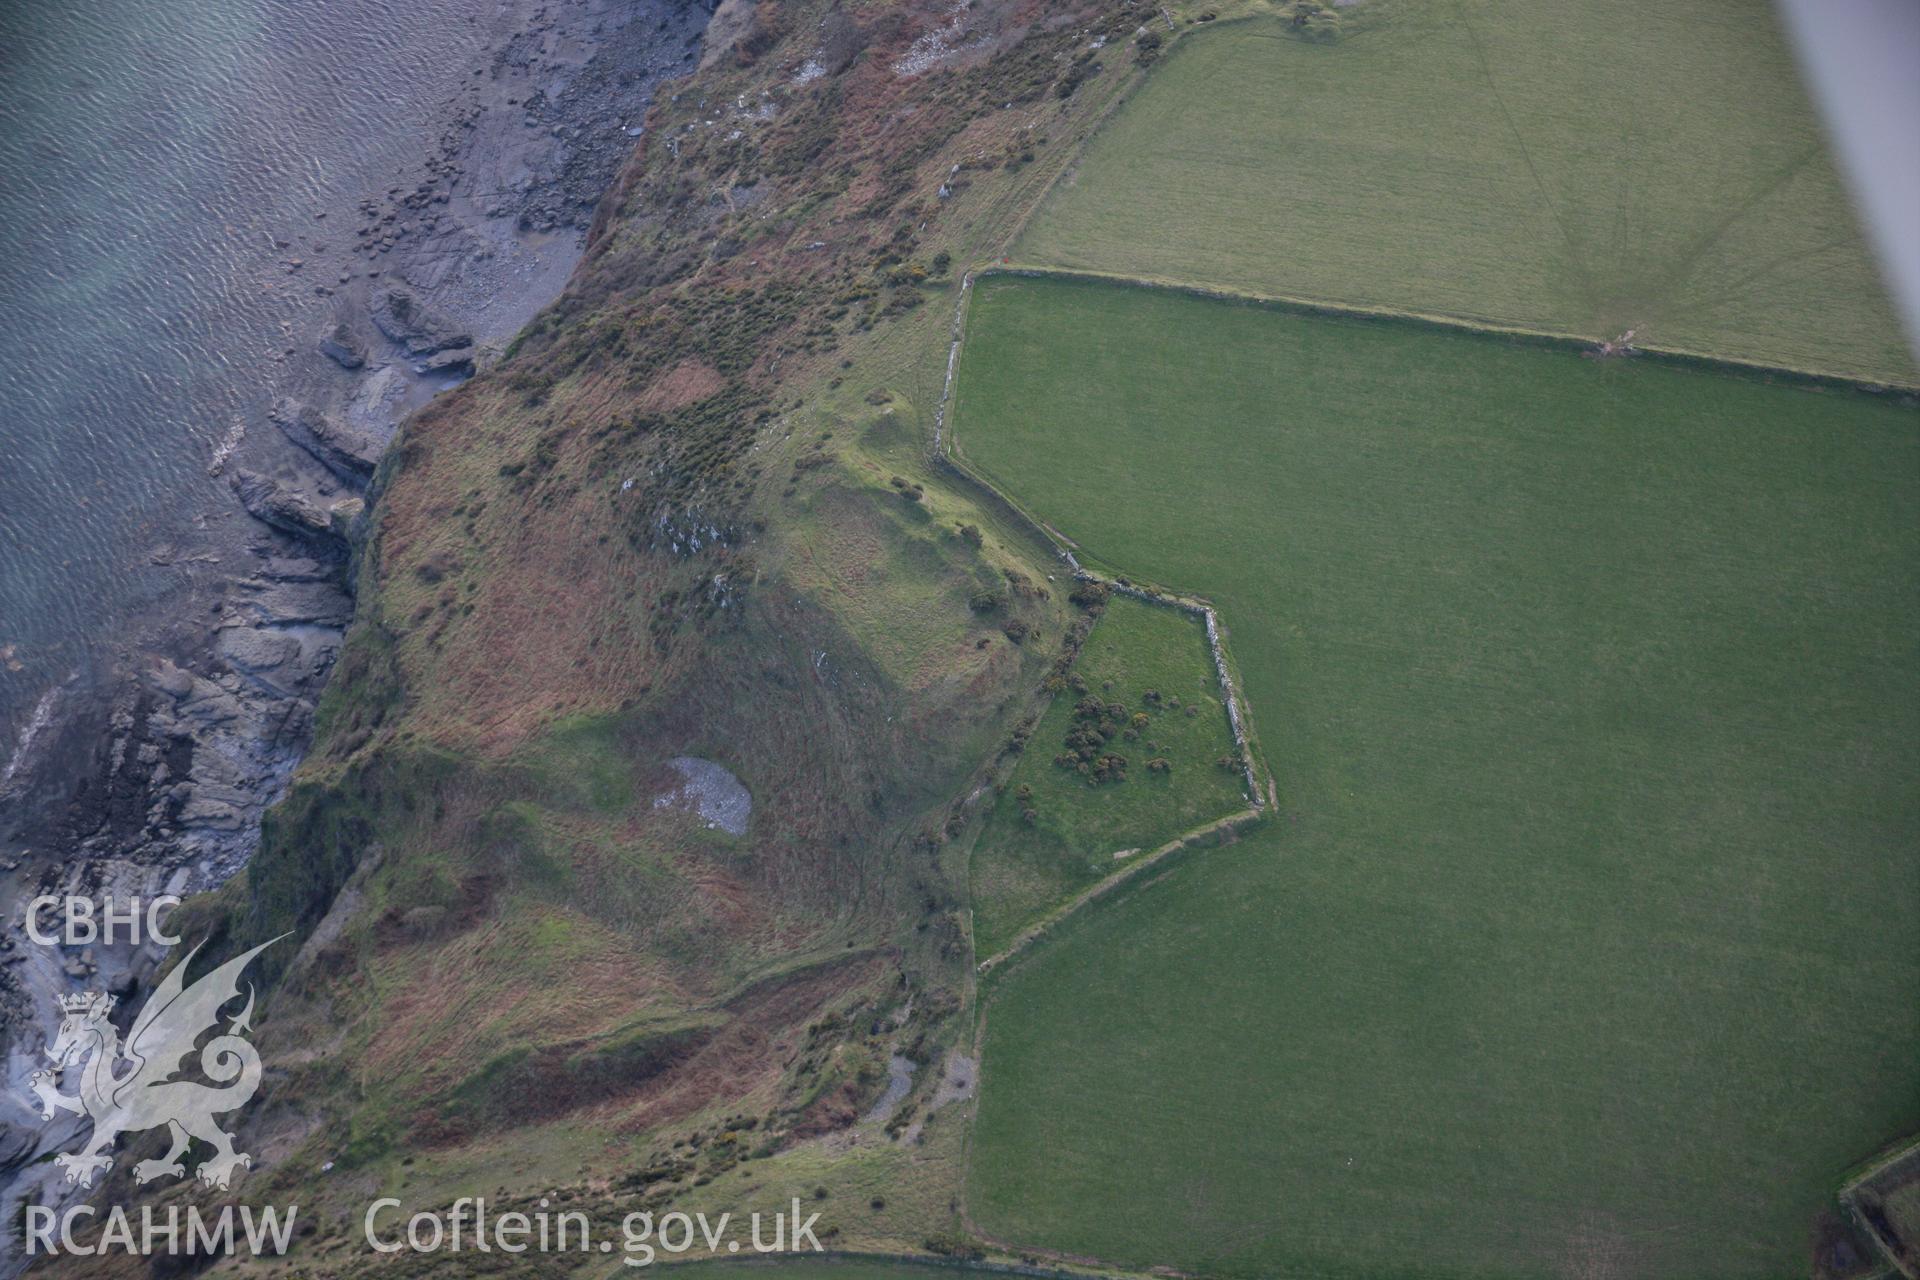 RCAHMW colour oblique aerial photograph of Pared Mawr Camp with promontory fort, Porth Ceiriad, viewed from the north. Taken on 09 February 2006 by Toby Driver.